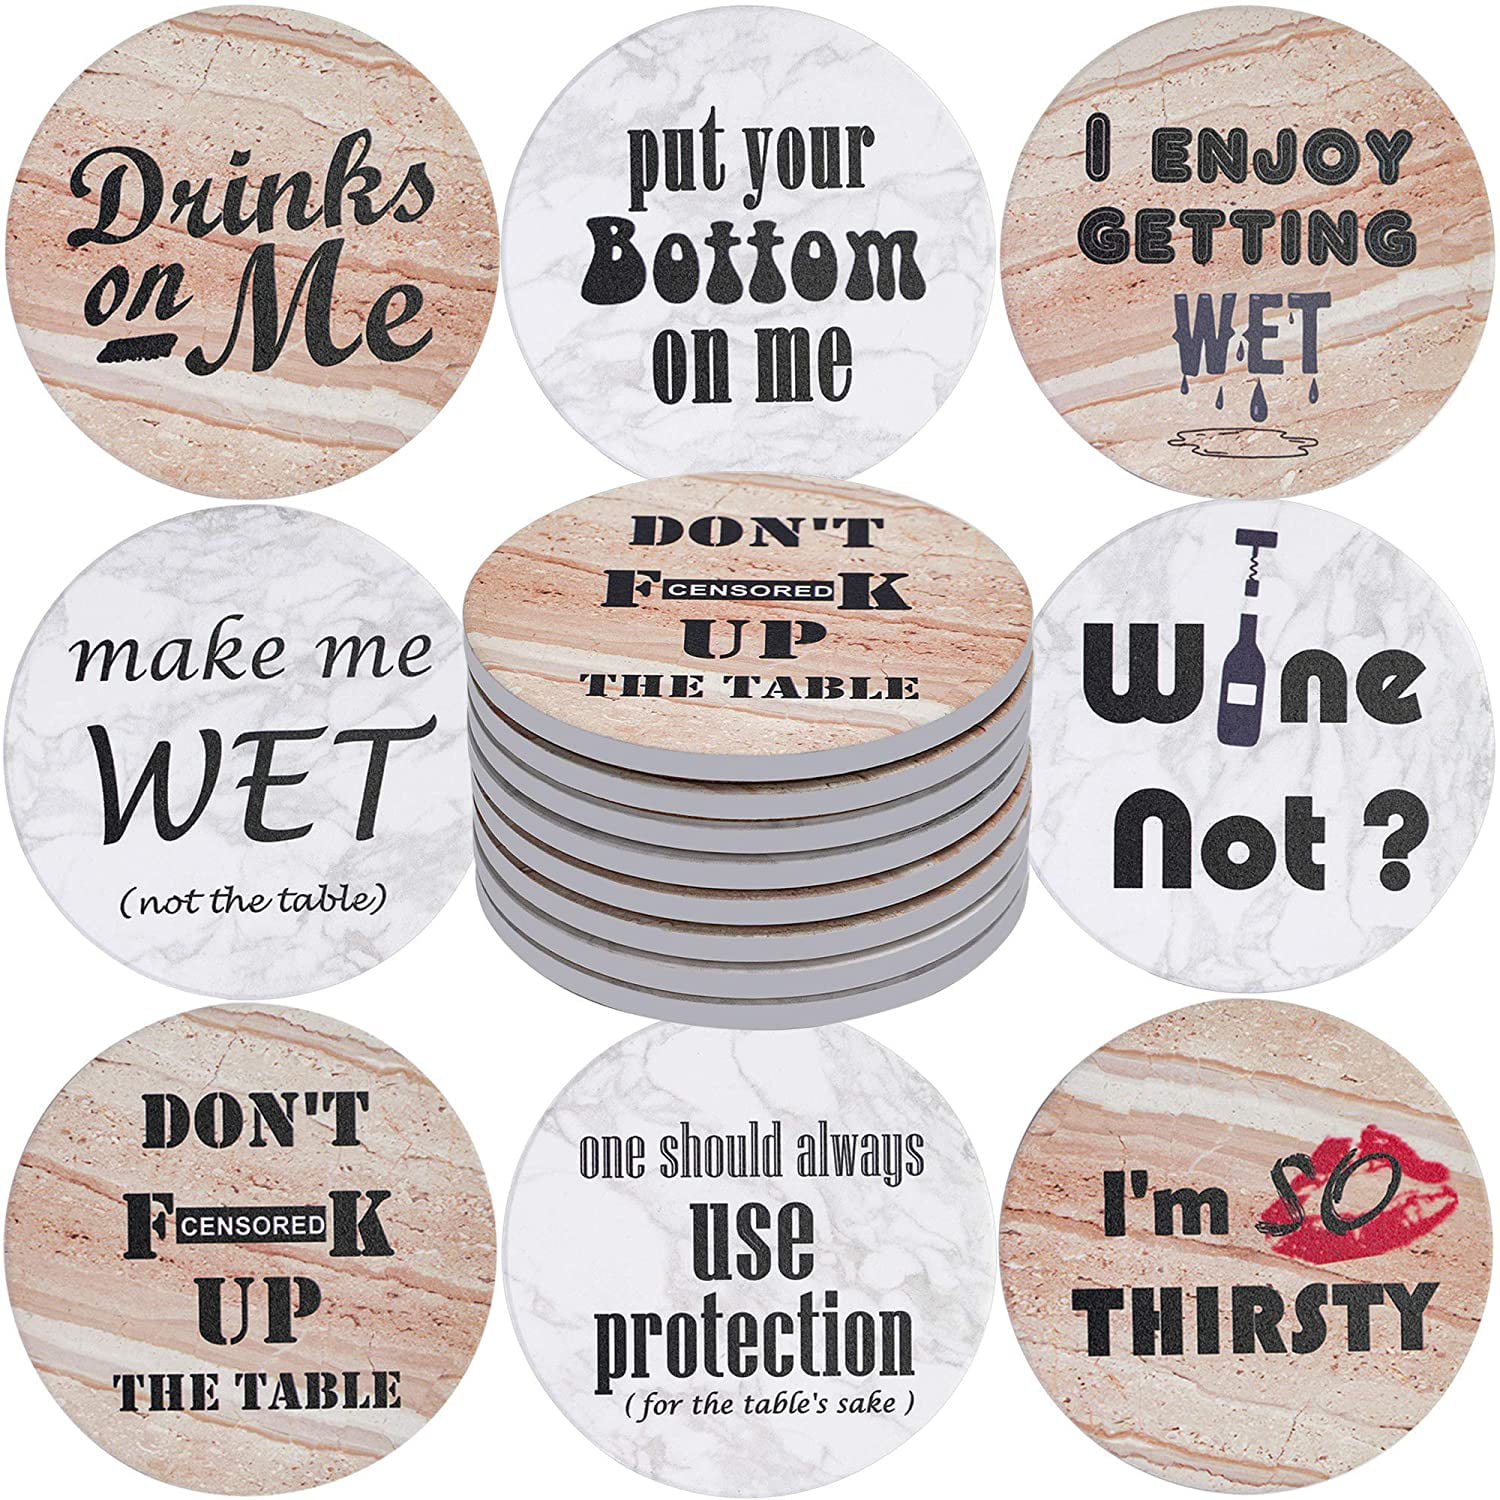 Metal Case of Scroll Design Holds Nicely the XL Ceramic Drink Mats with Cork Backing Set of 8 Funny Sayings Marble Finish Coasters PLUS Round Iron Stand in Black Absorbent Coaster & Holder Bundle